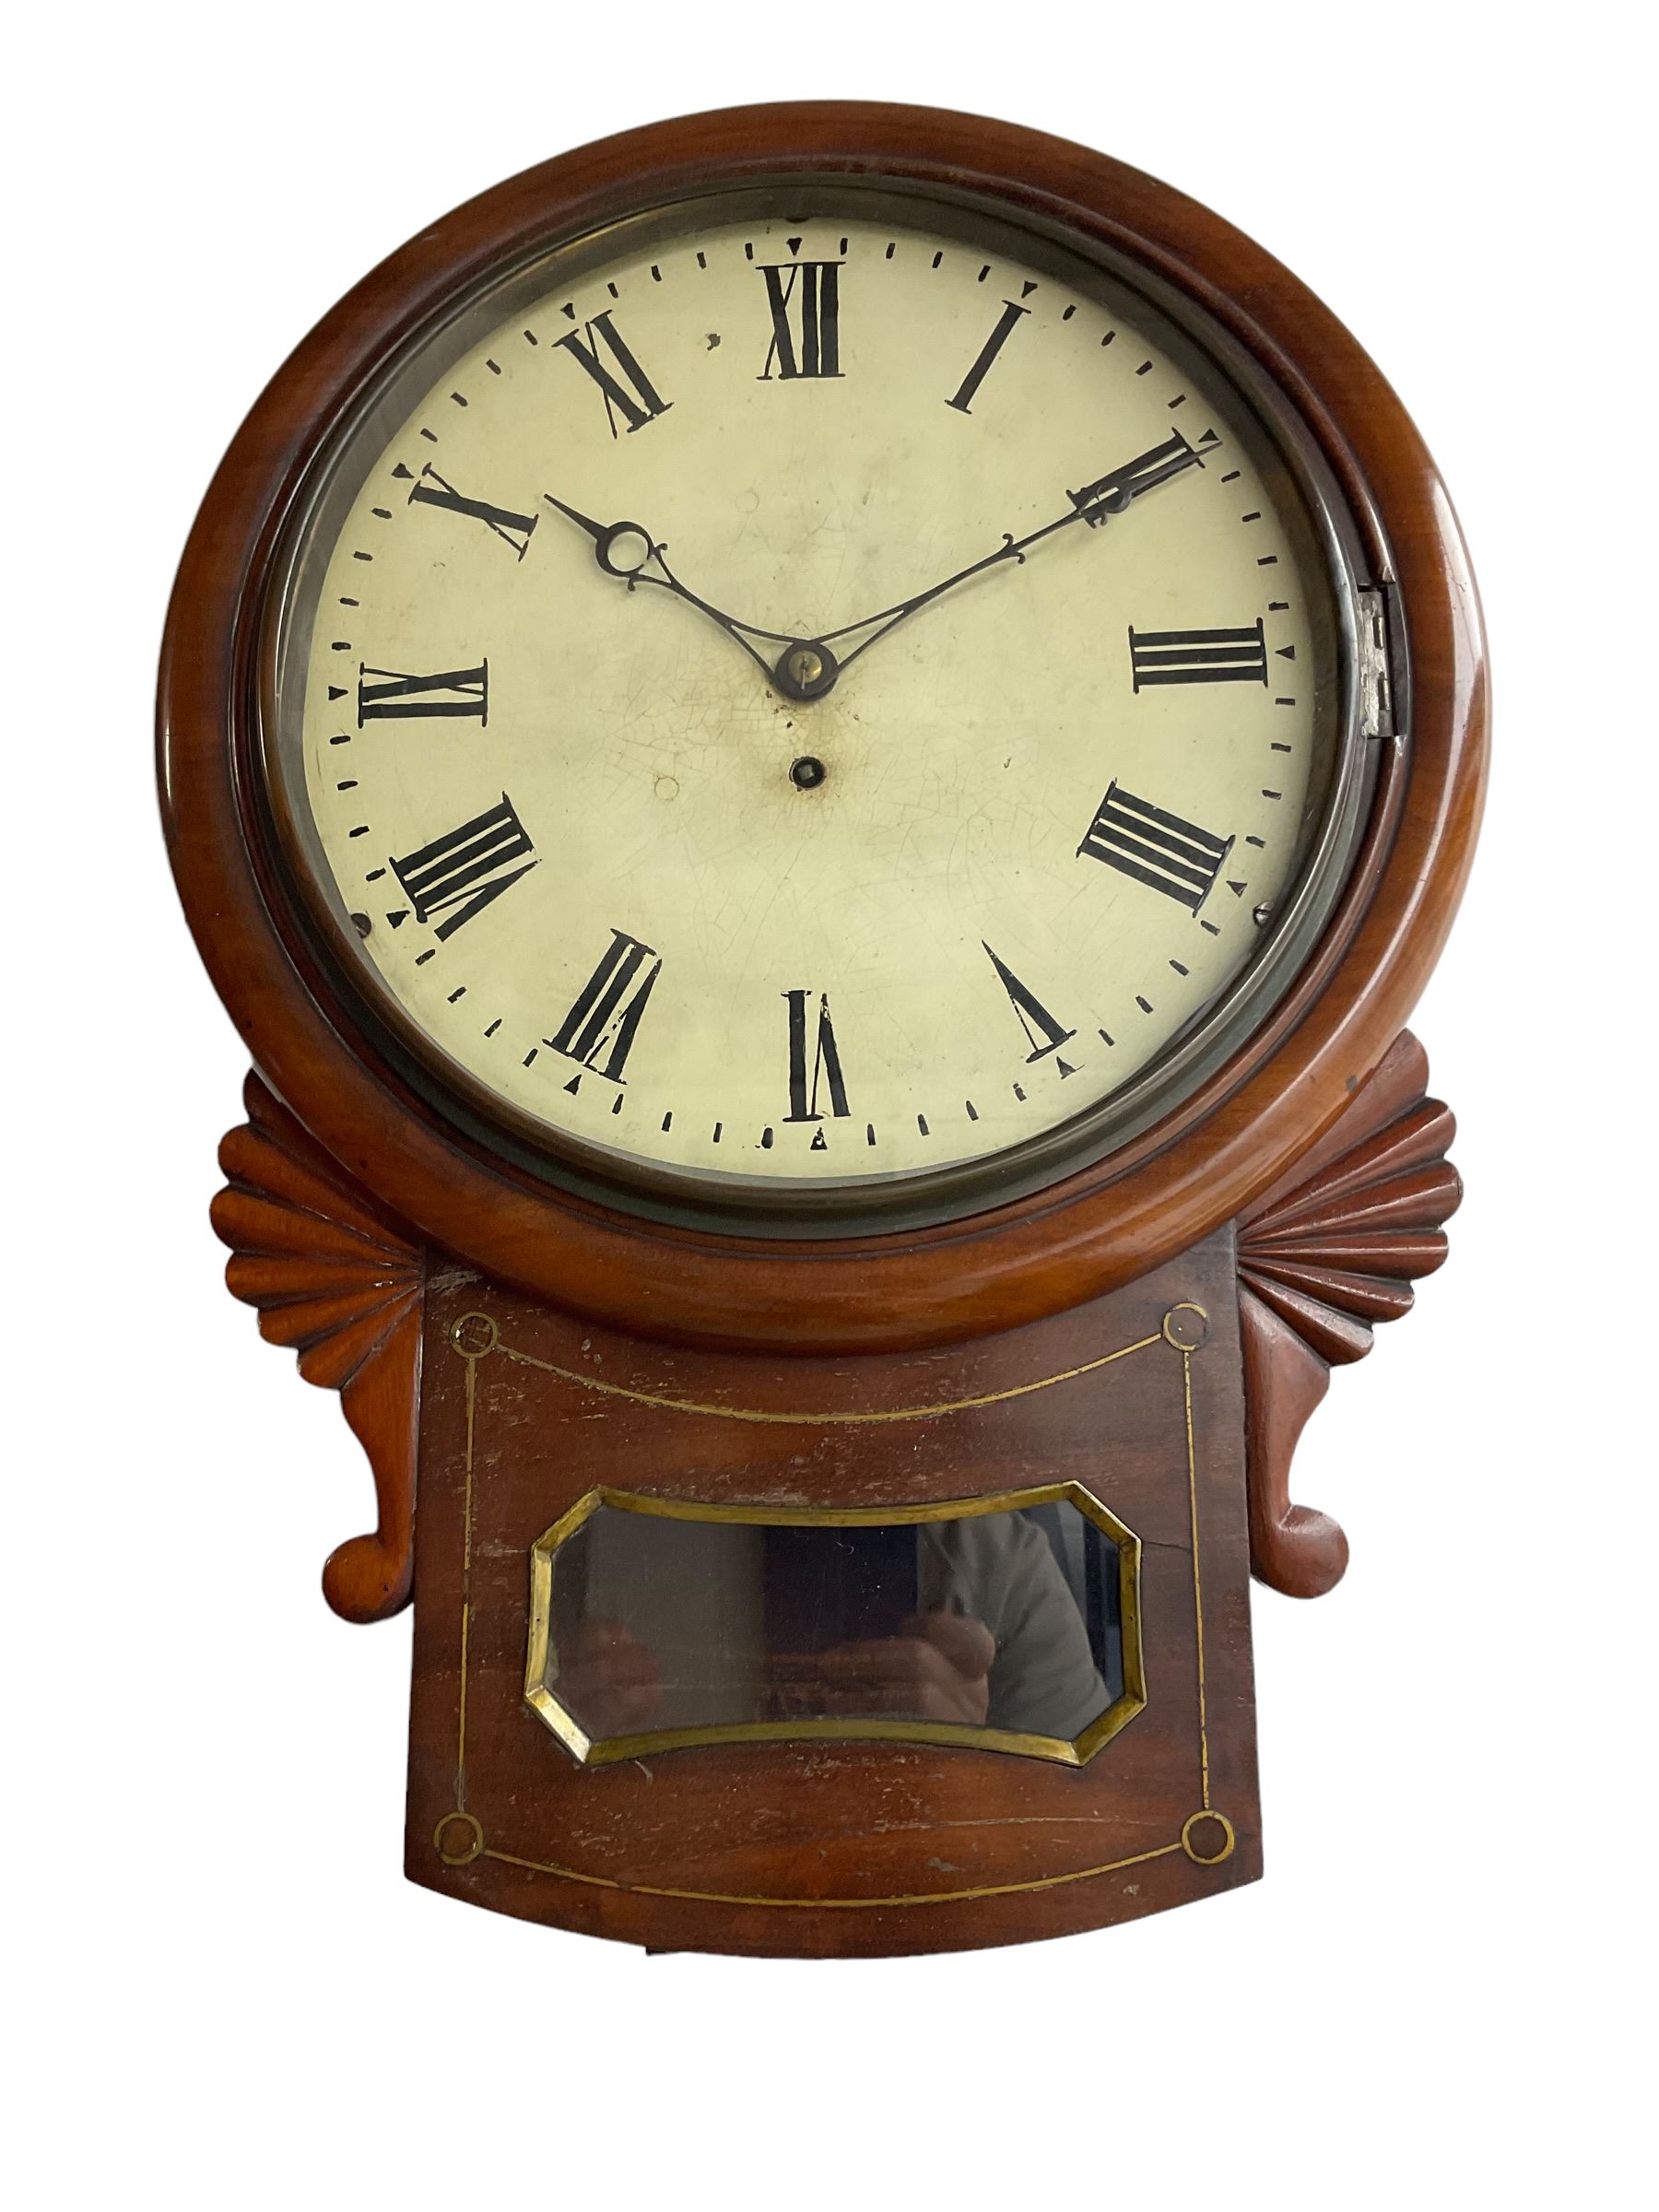 English - William IV drop dial 8-day fusee wall clock in a mahogany case